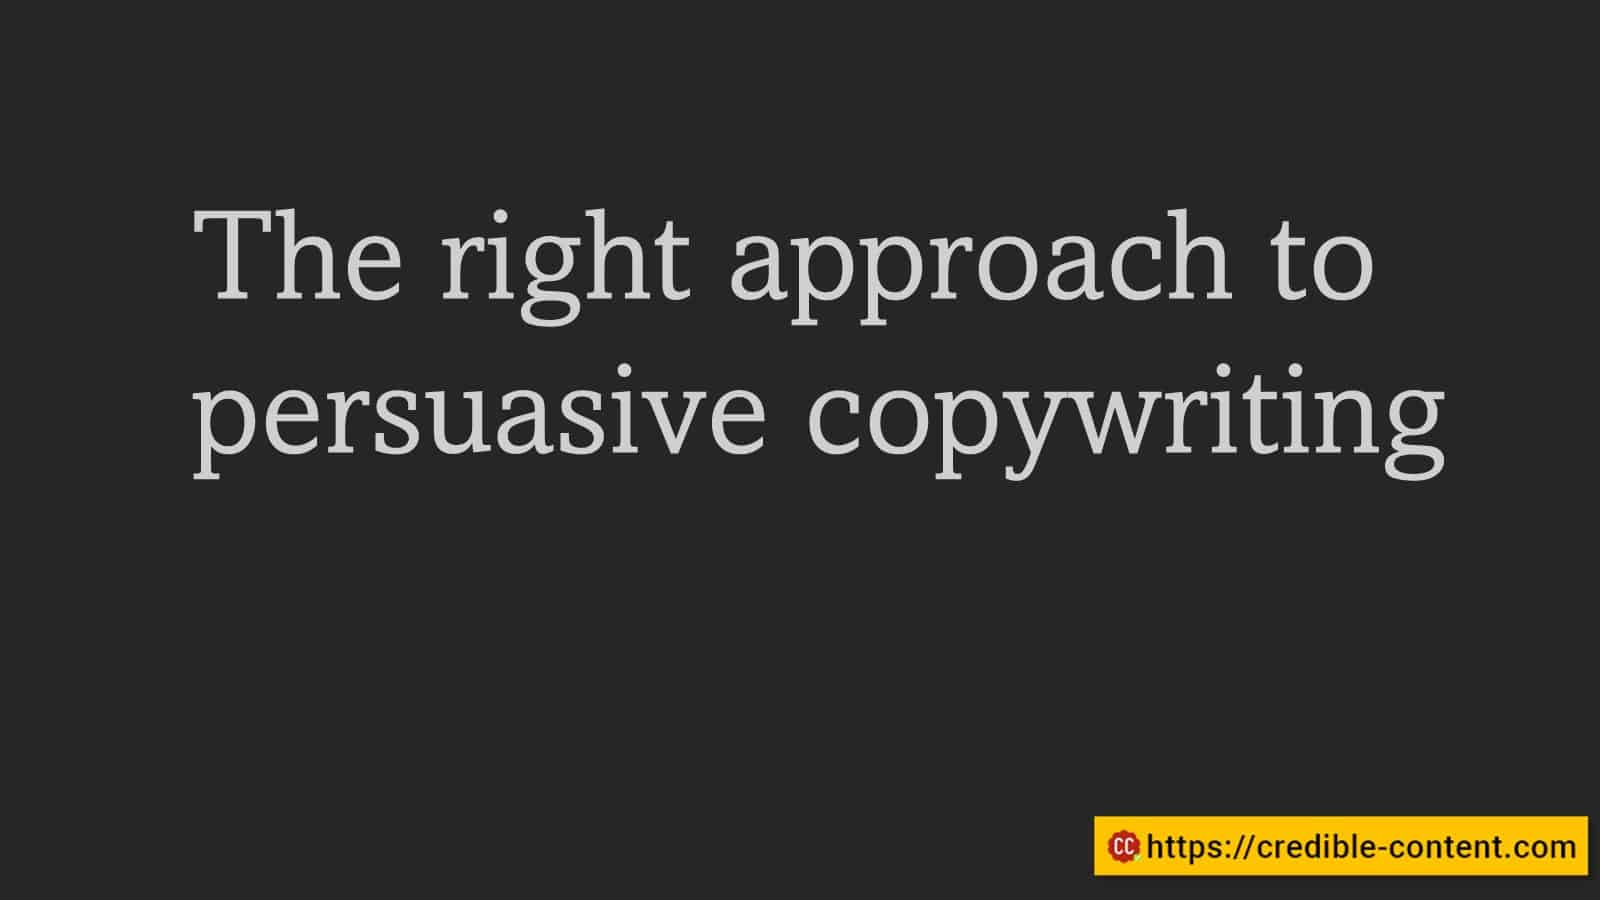 The right approach to persuasive copywriting